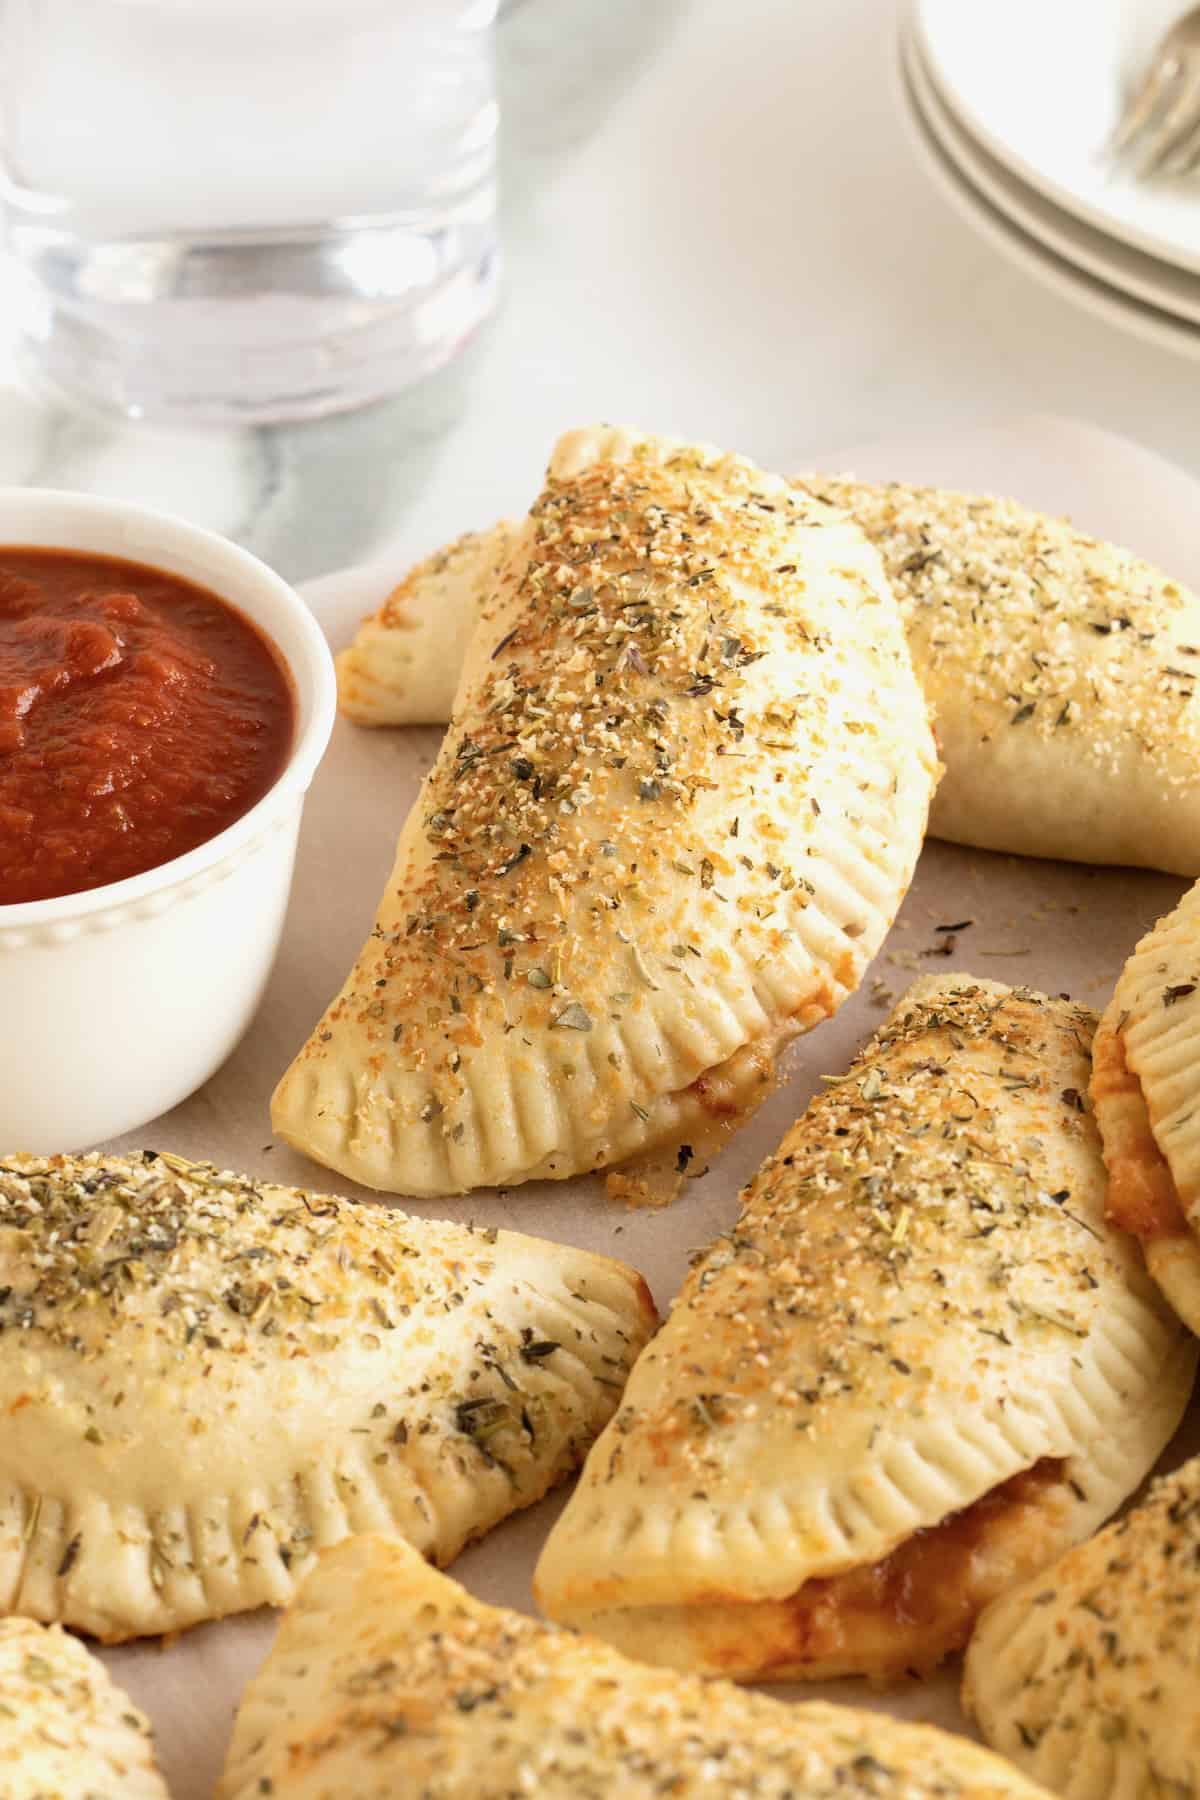 Five mini calzones on a white plate next to a small dish of marinara sauce.